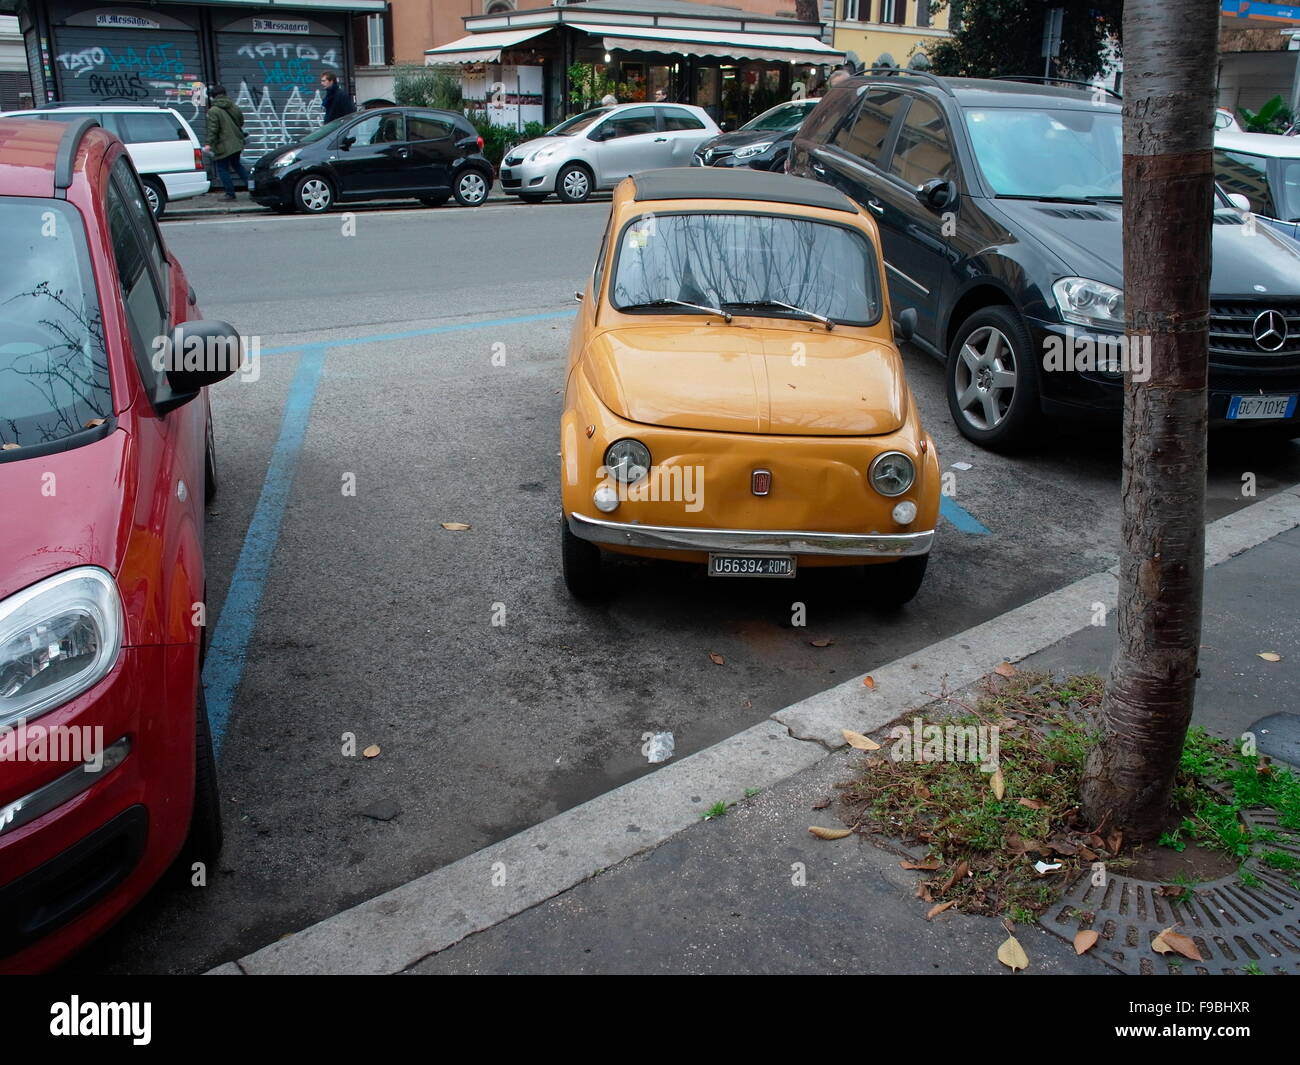 AJAXNETPHOTO. 2015. ROME, ITALY. - FIAT 500 CINQUECENTO - DANTE GIACOSA'S ORIGINAL 1957-1975 CITY CAR SALOON MODEL PARKED IN THE CITY. FIAT MADE MORE THAN 3MILLION OF THESE VEHICLES BEFORE PRODUCTION ENDED. PHOTO:JONATHAN EASTLAND/AJAX REF:GX151012 758884 Stock Photo